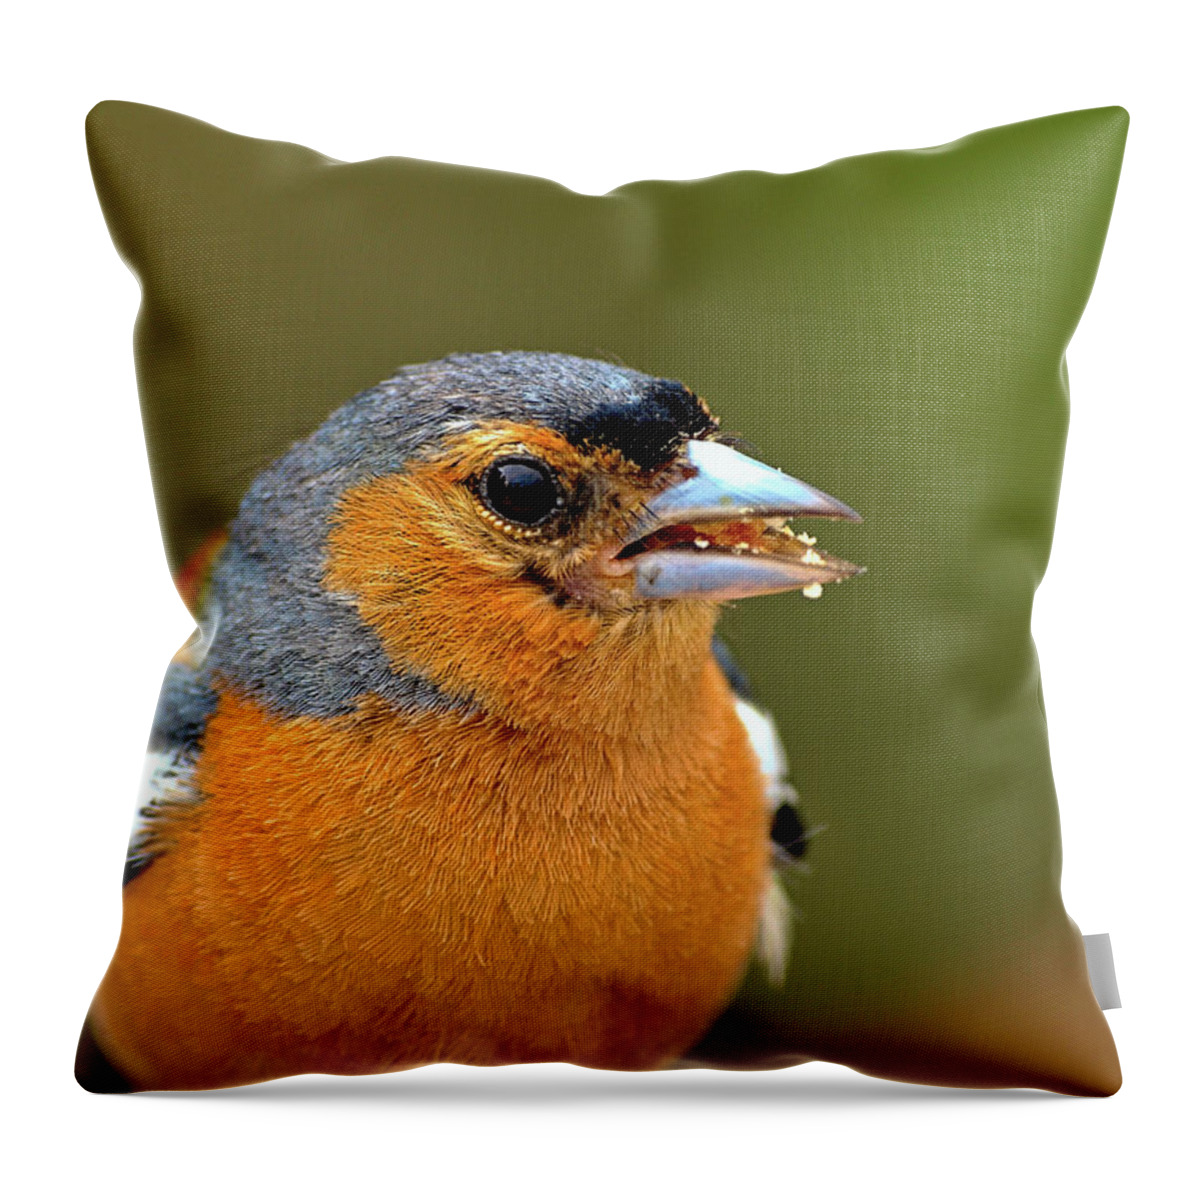 Birds Throw Pillow featuring the photograph Feeding Time by Richard Denyer